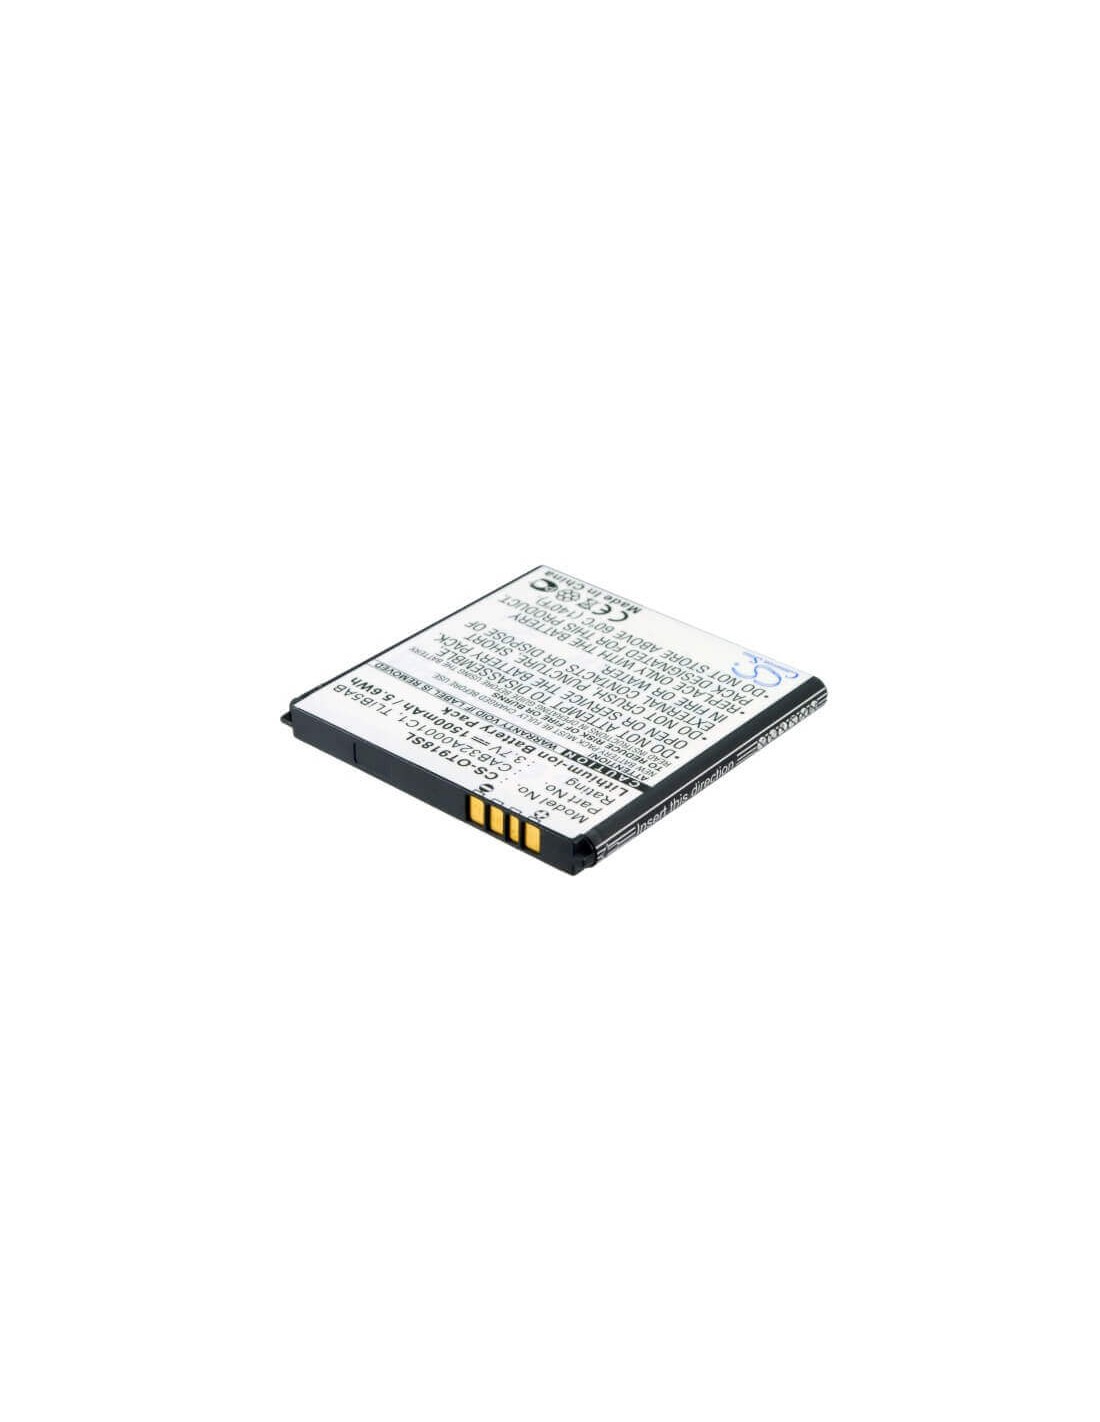 Battery for Alcatel OT-918 Mix, One Touch 918 Mix 3.7V, 1500mAh - 5.55Wh